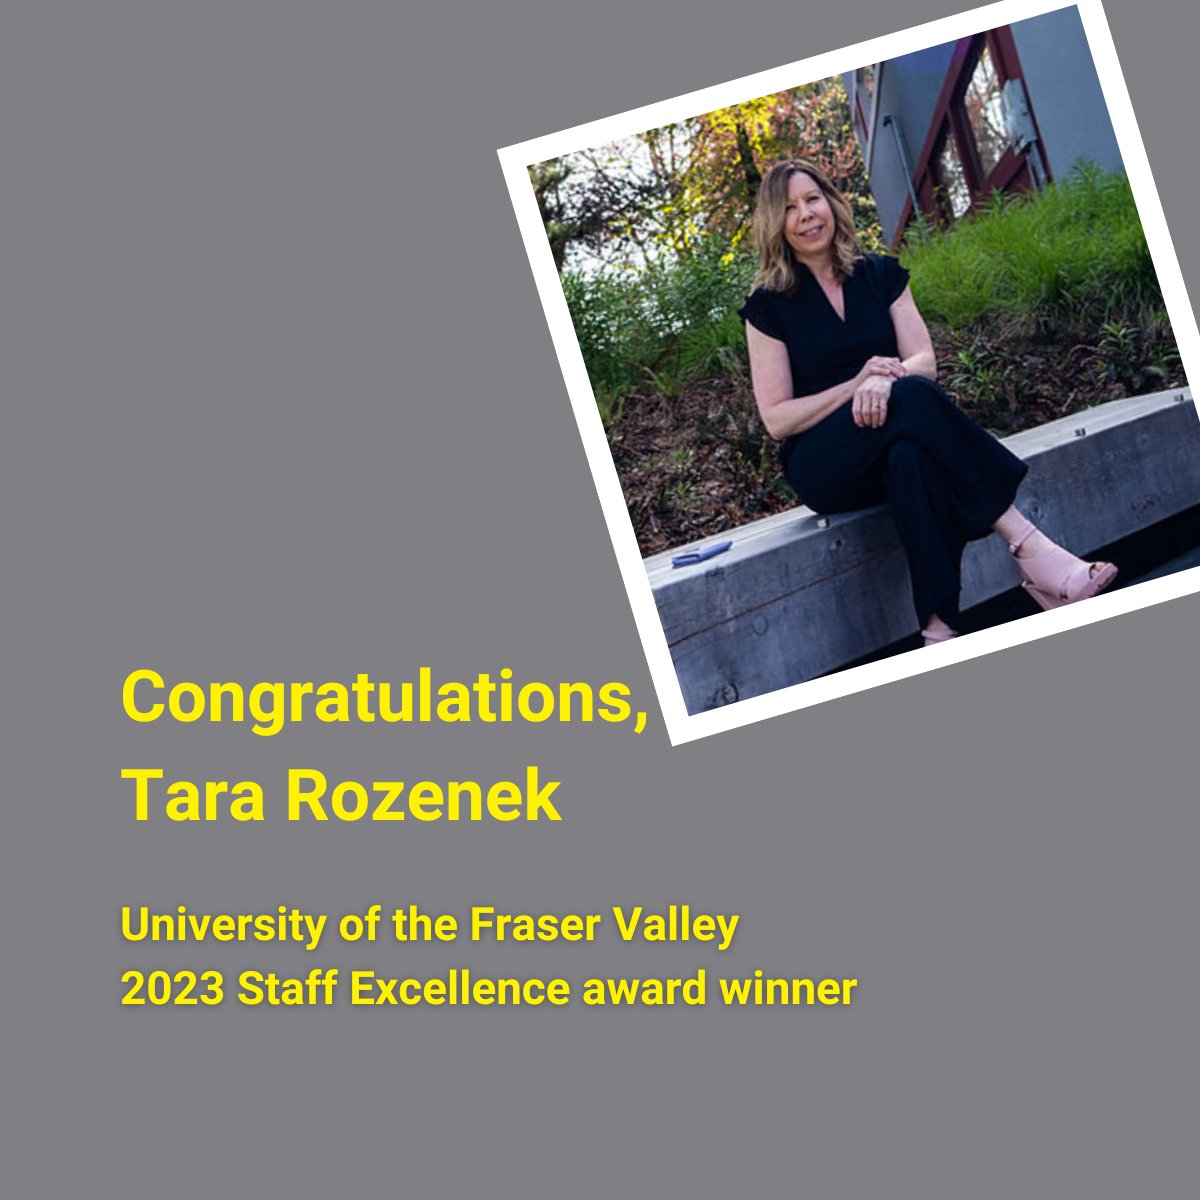 🎉Congratulations for winning the 2023 University of the Fraser Valley Staff Excellence award, Tara Rozenek!

Read more at UFV Today:
blogs.ufv.ca/blog/2023/05/s…

#goUFv #FraserValley #StaffExcellence #UFVToday @goUFV